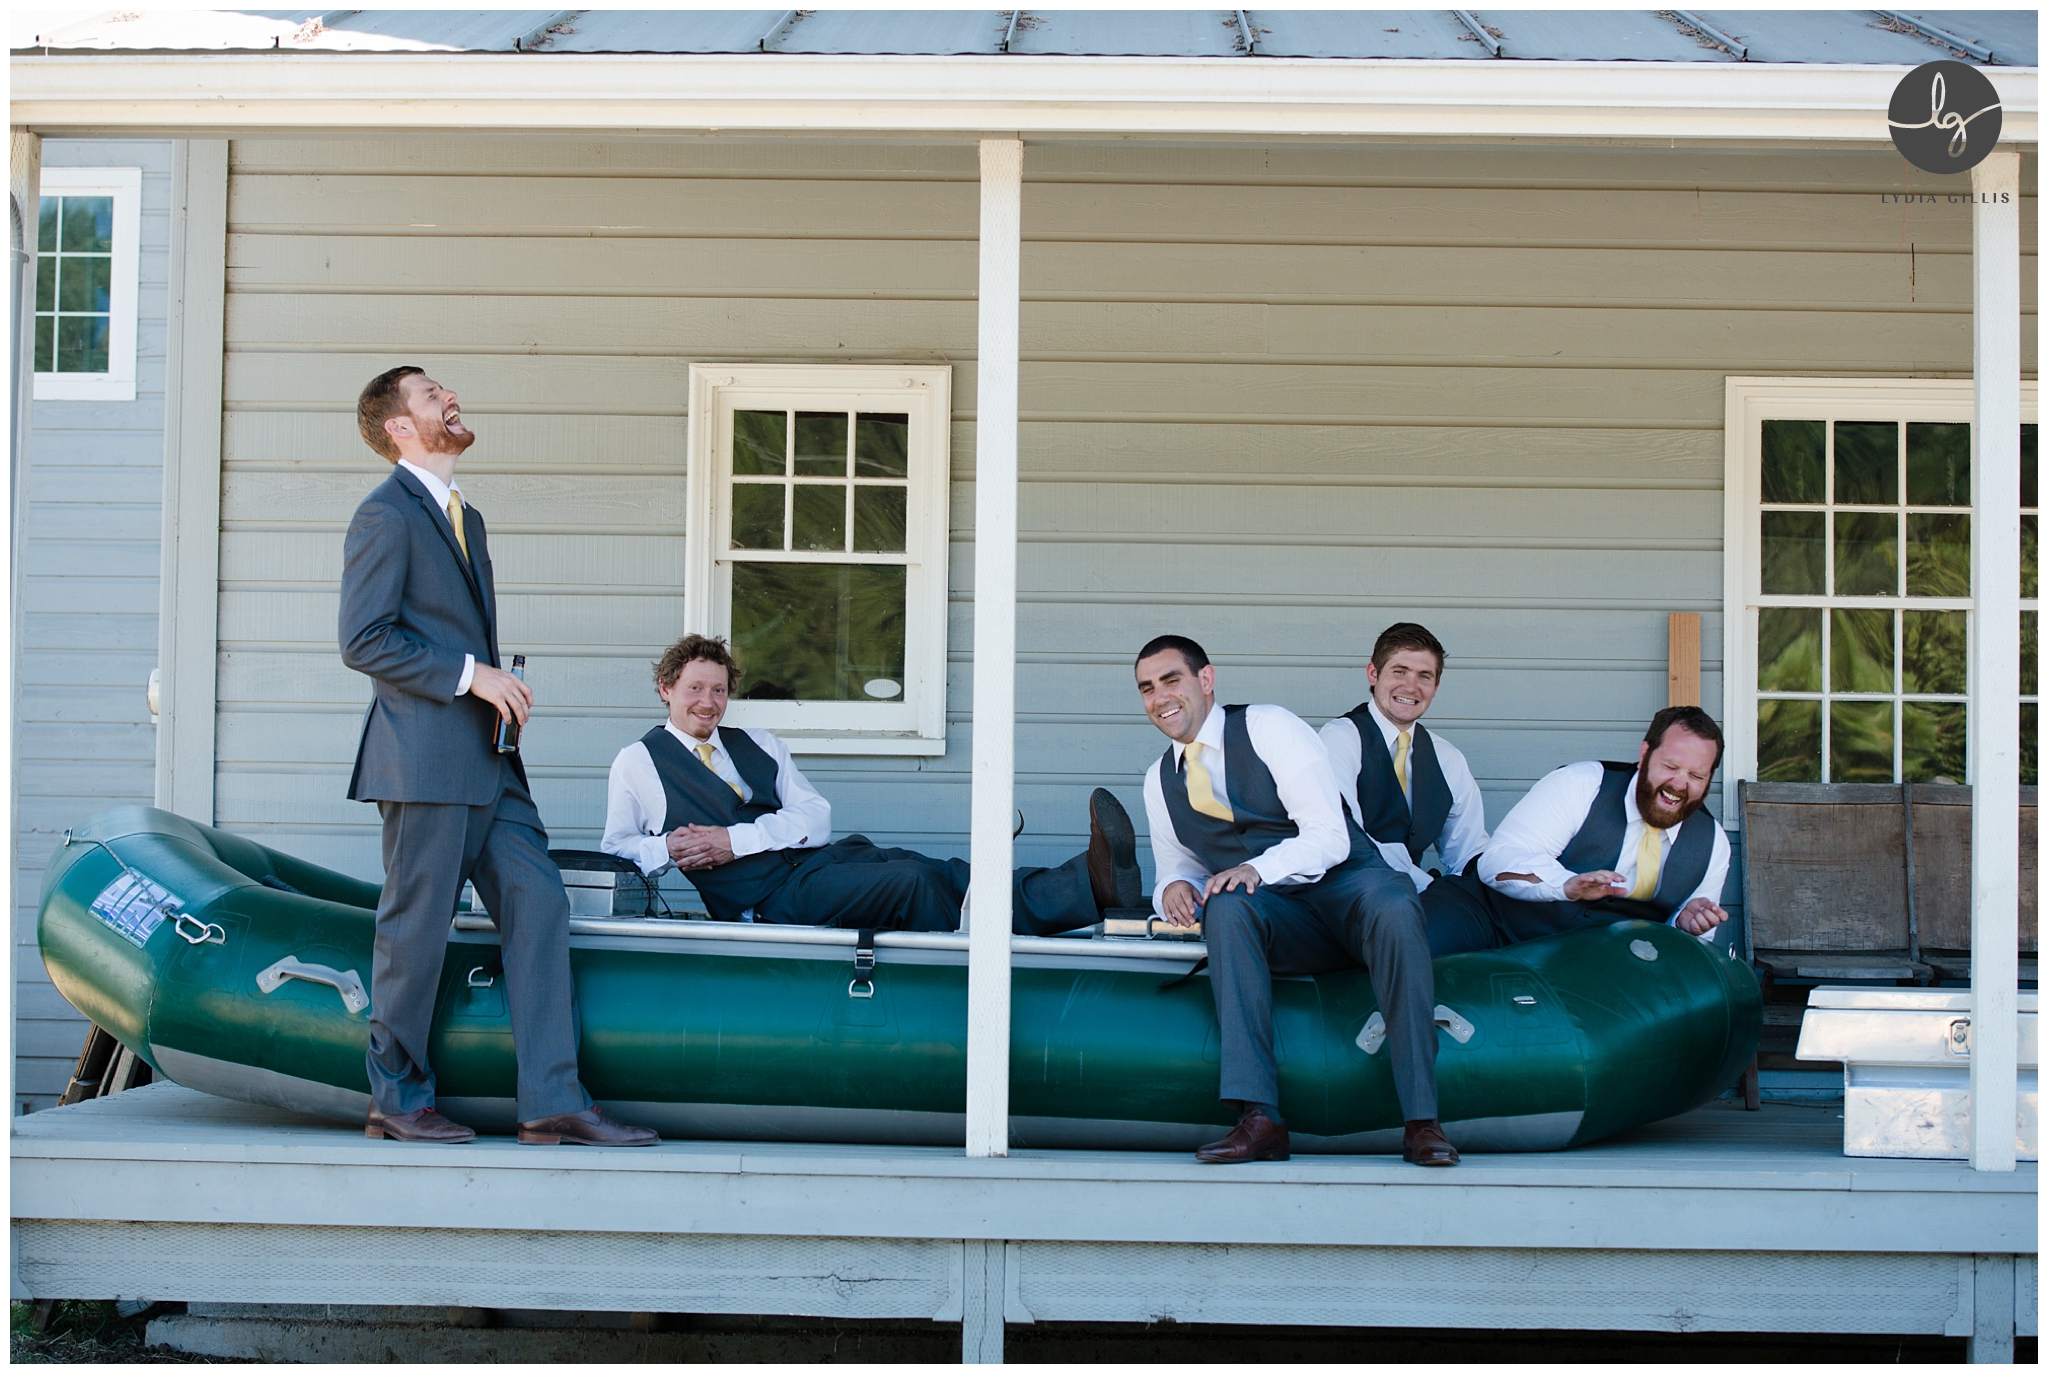 v,outdoor wedding, picture of wedding party sitting on a boat | Lydia Gillis Photography 